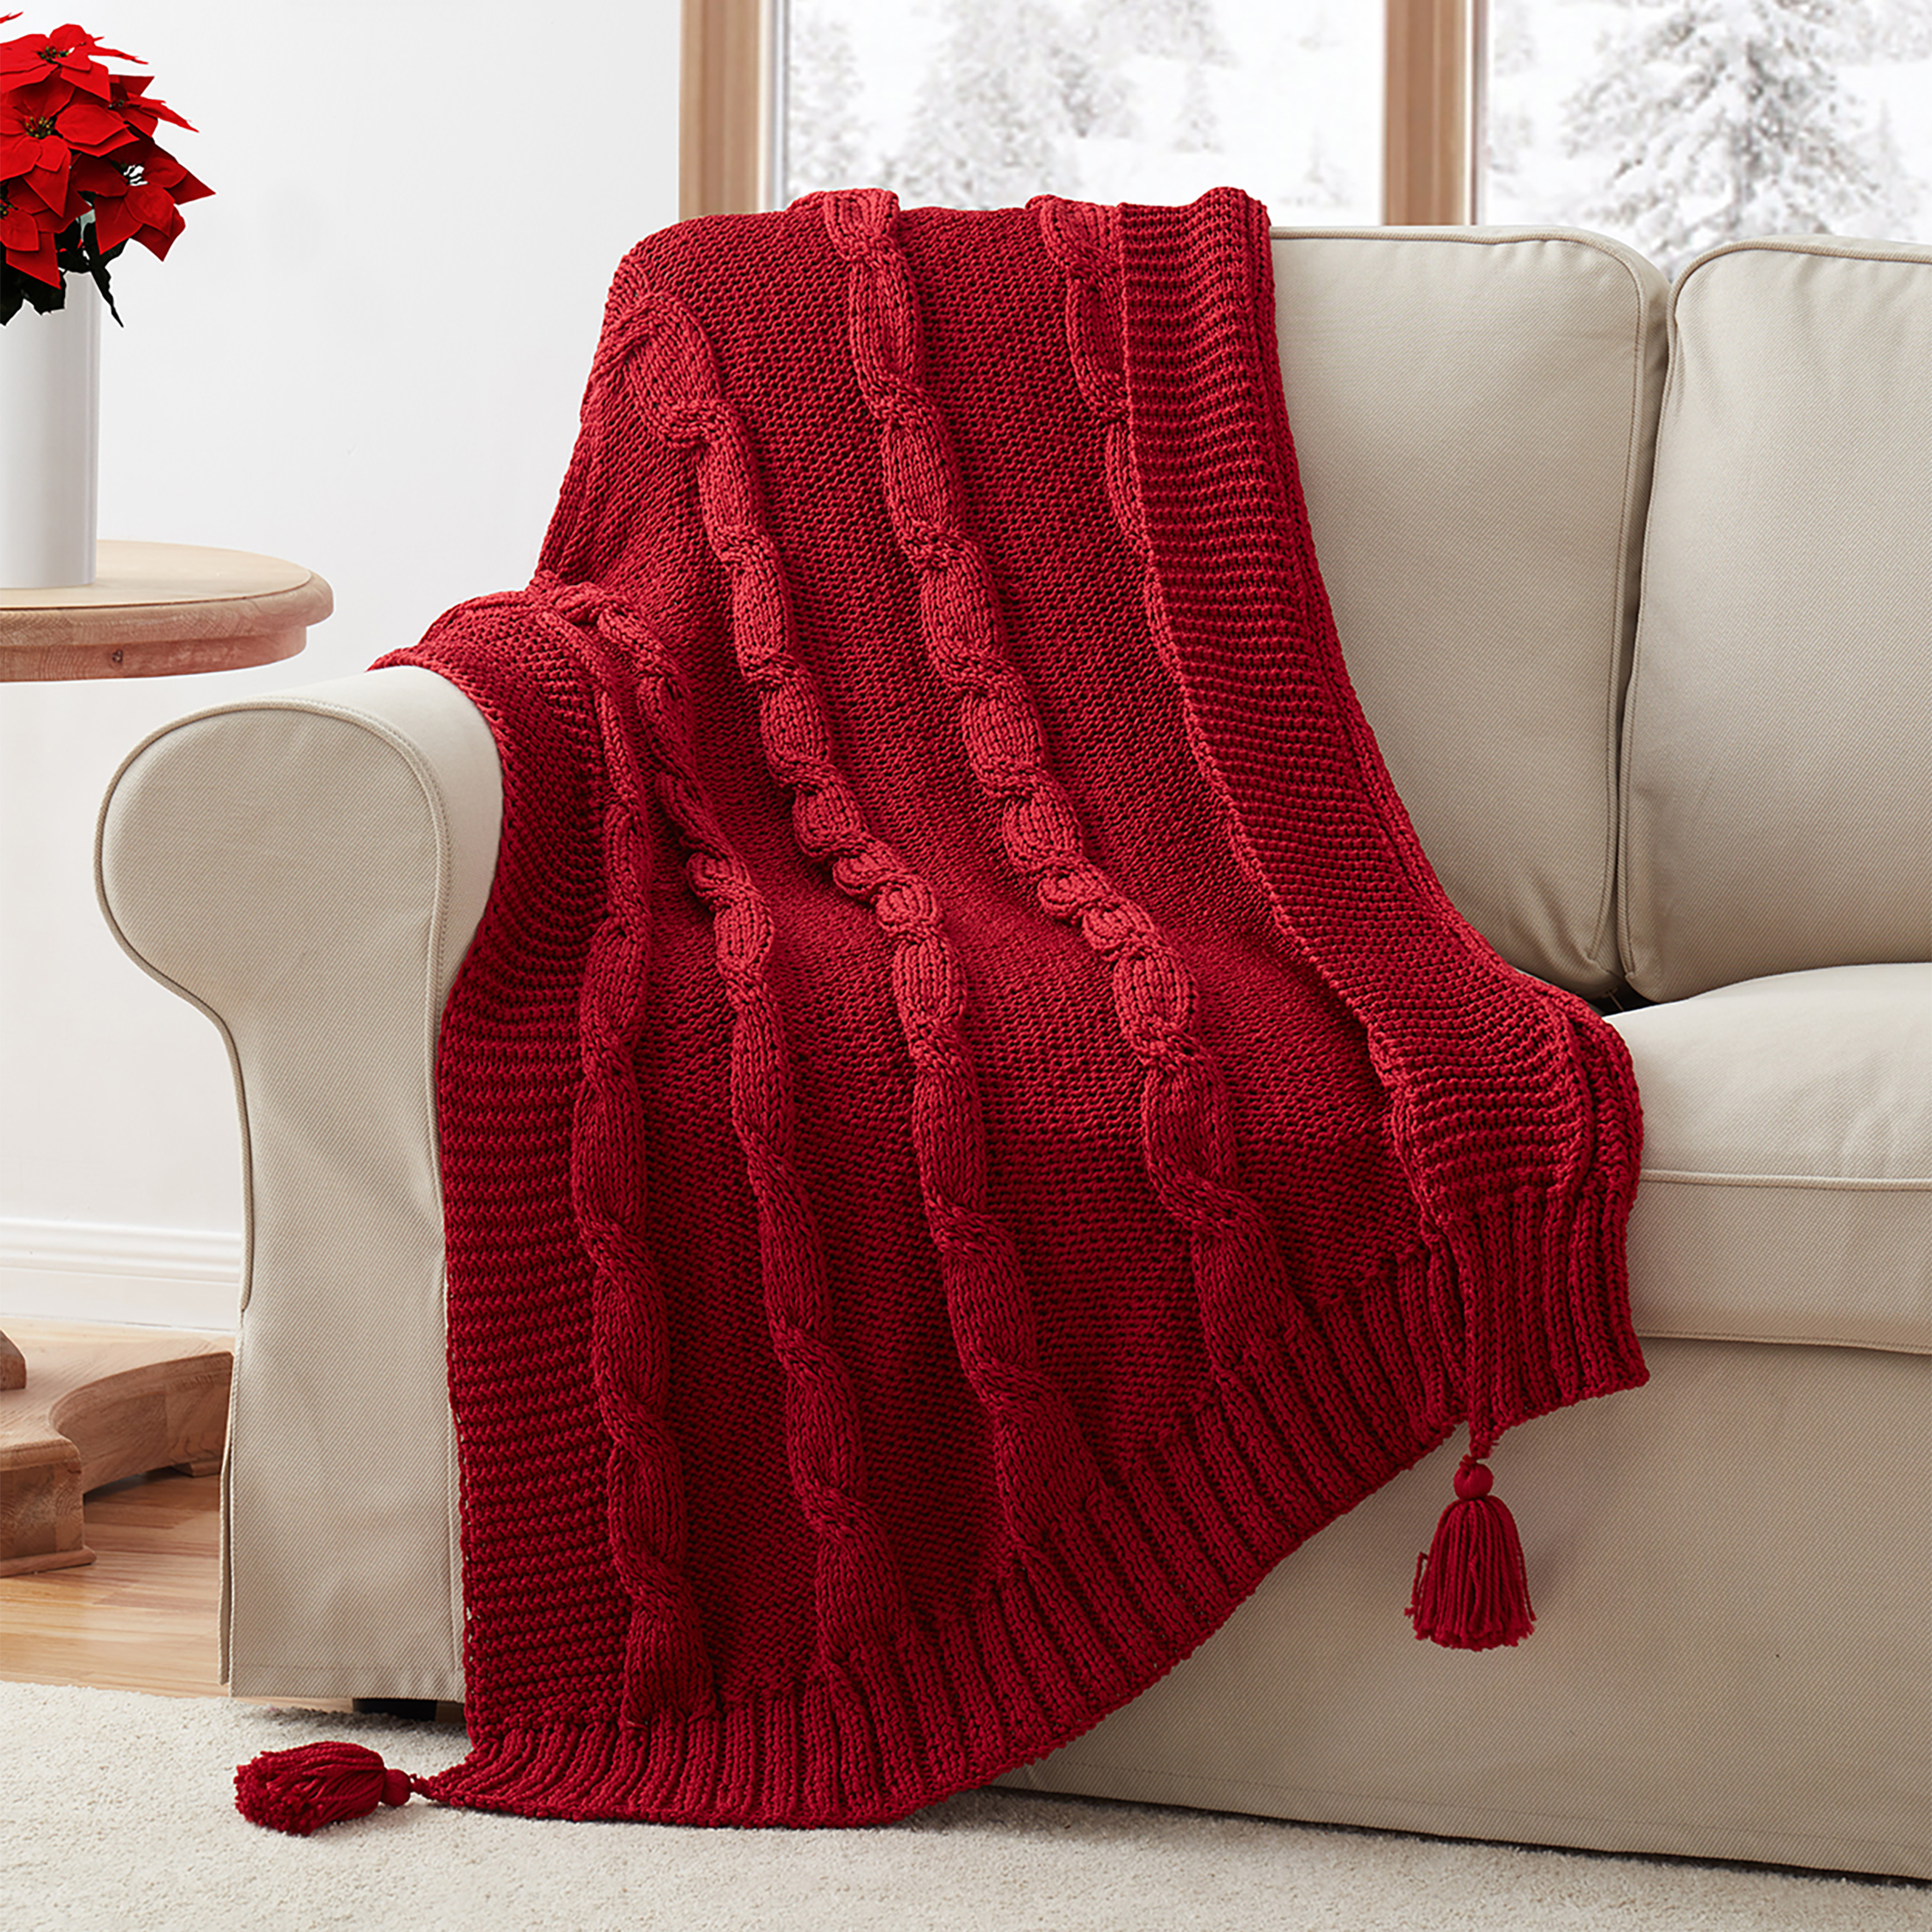 My Texas House Willow Cable Knit Cotton Throw Blanket, Red, Standard Throw - image 4 of 5